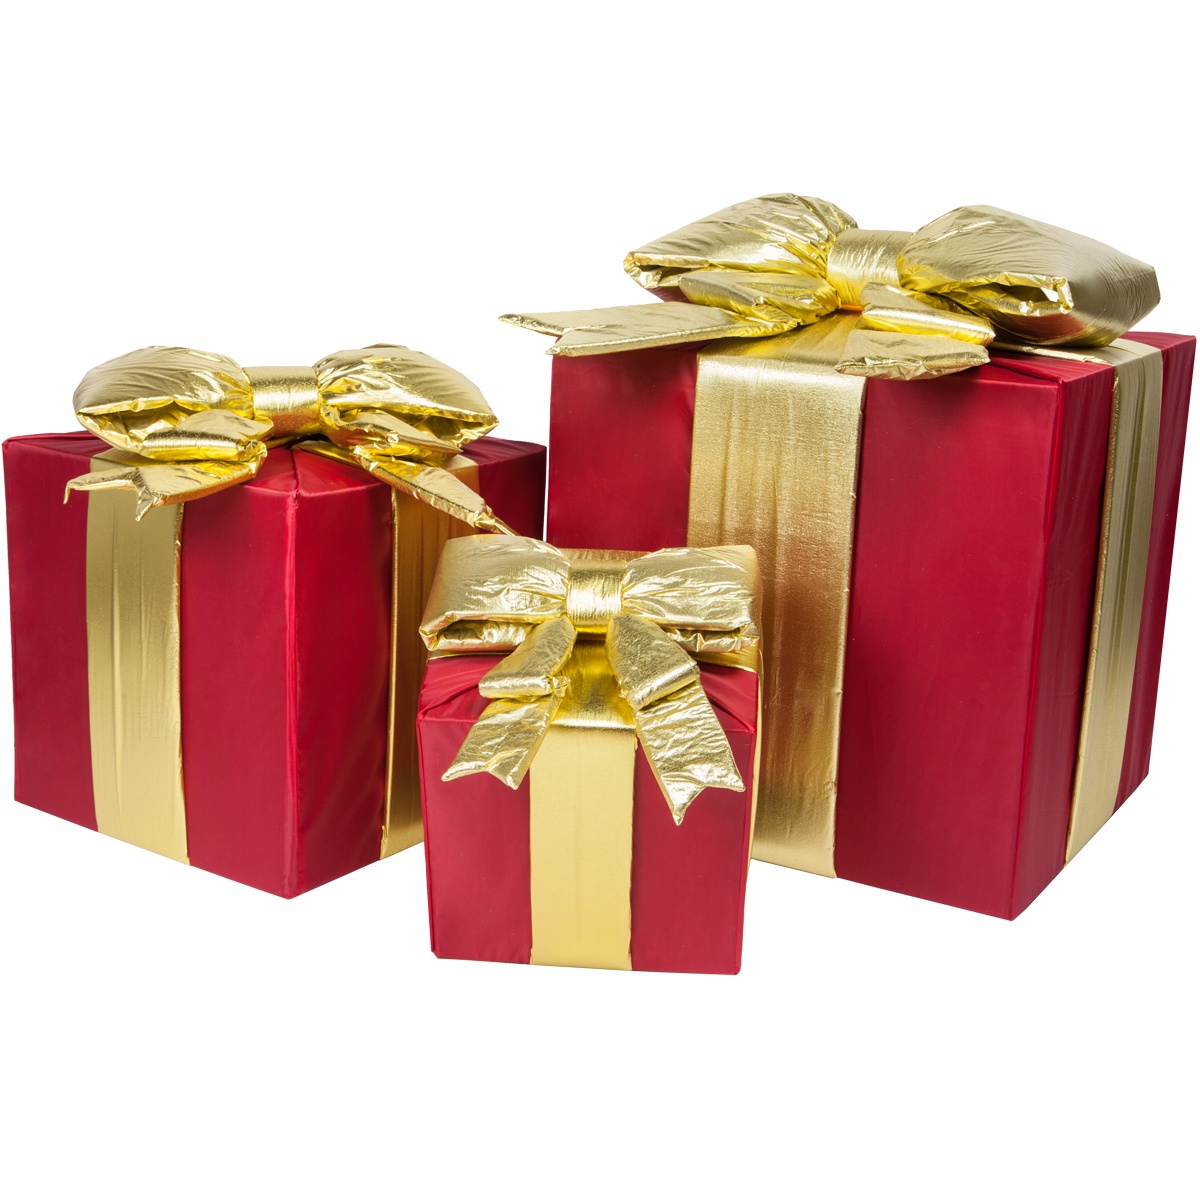 Unwanted Christmas gifts? How to sell, return, auction 